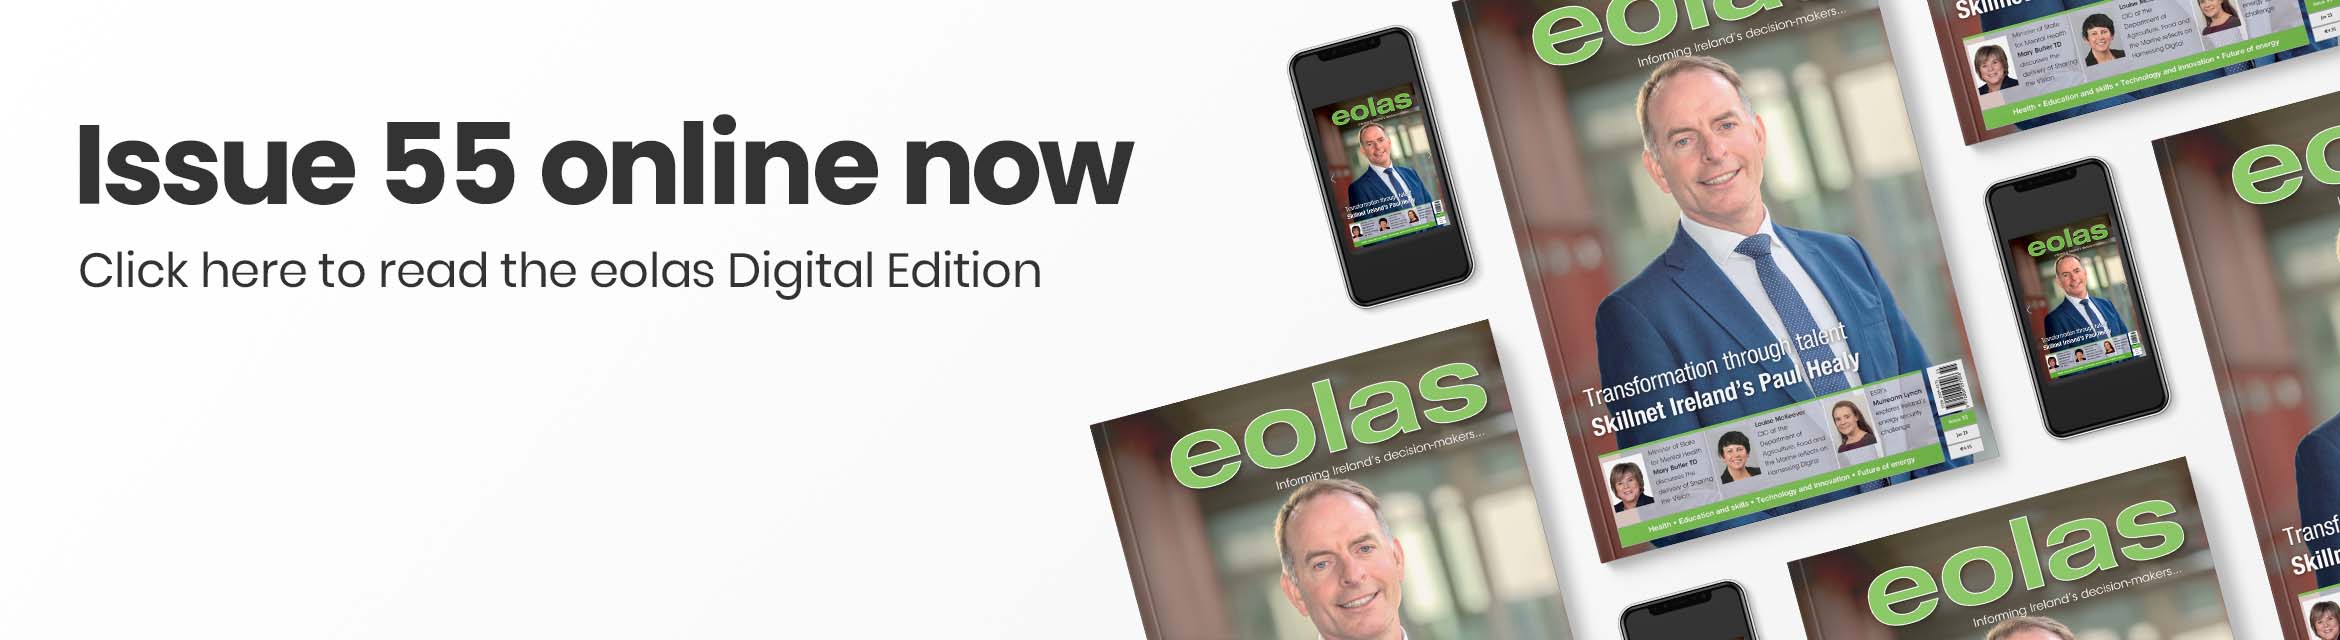 Issue 55 online now • Read the eolas Digital Edition